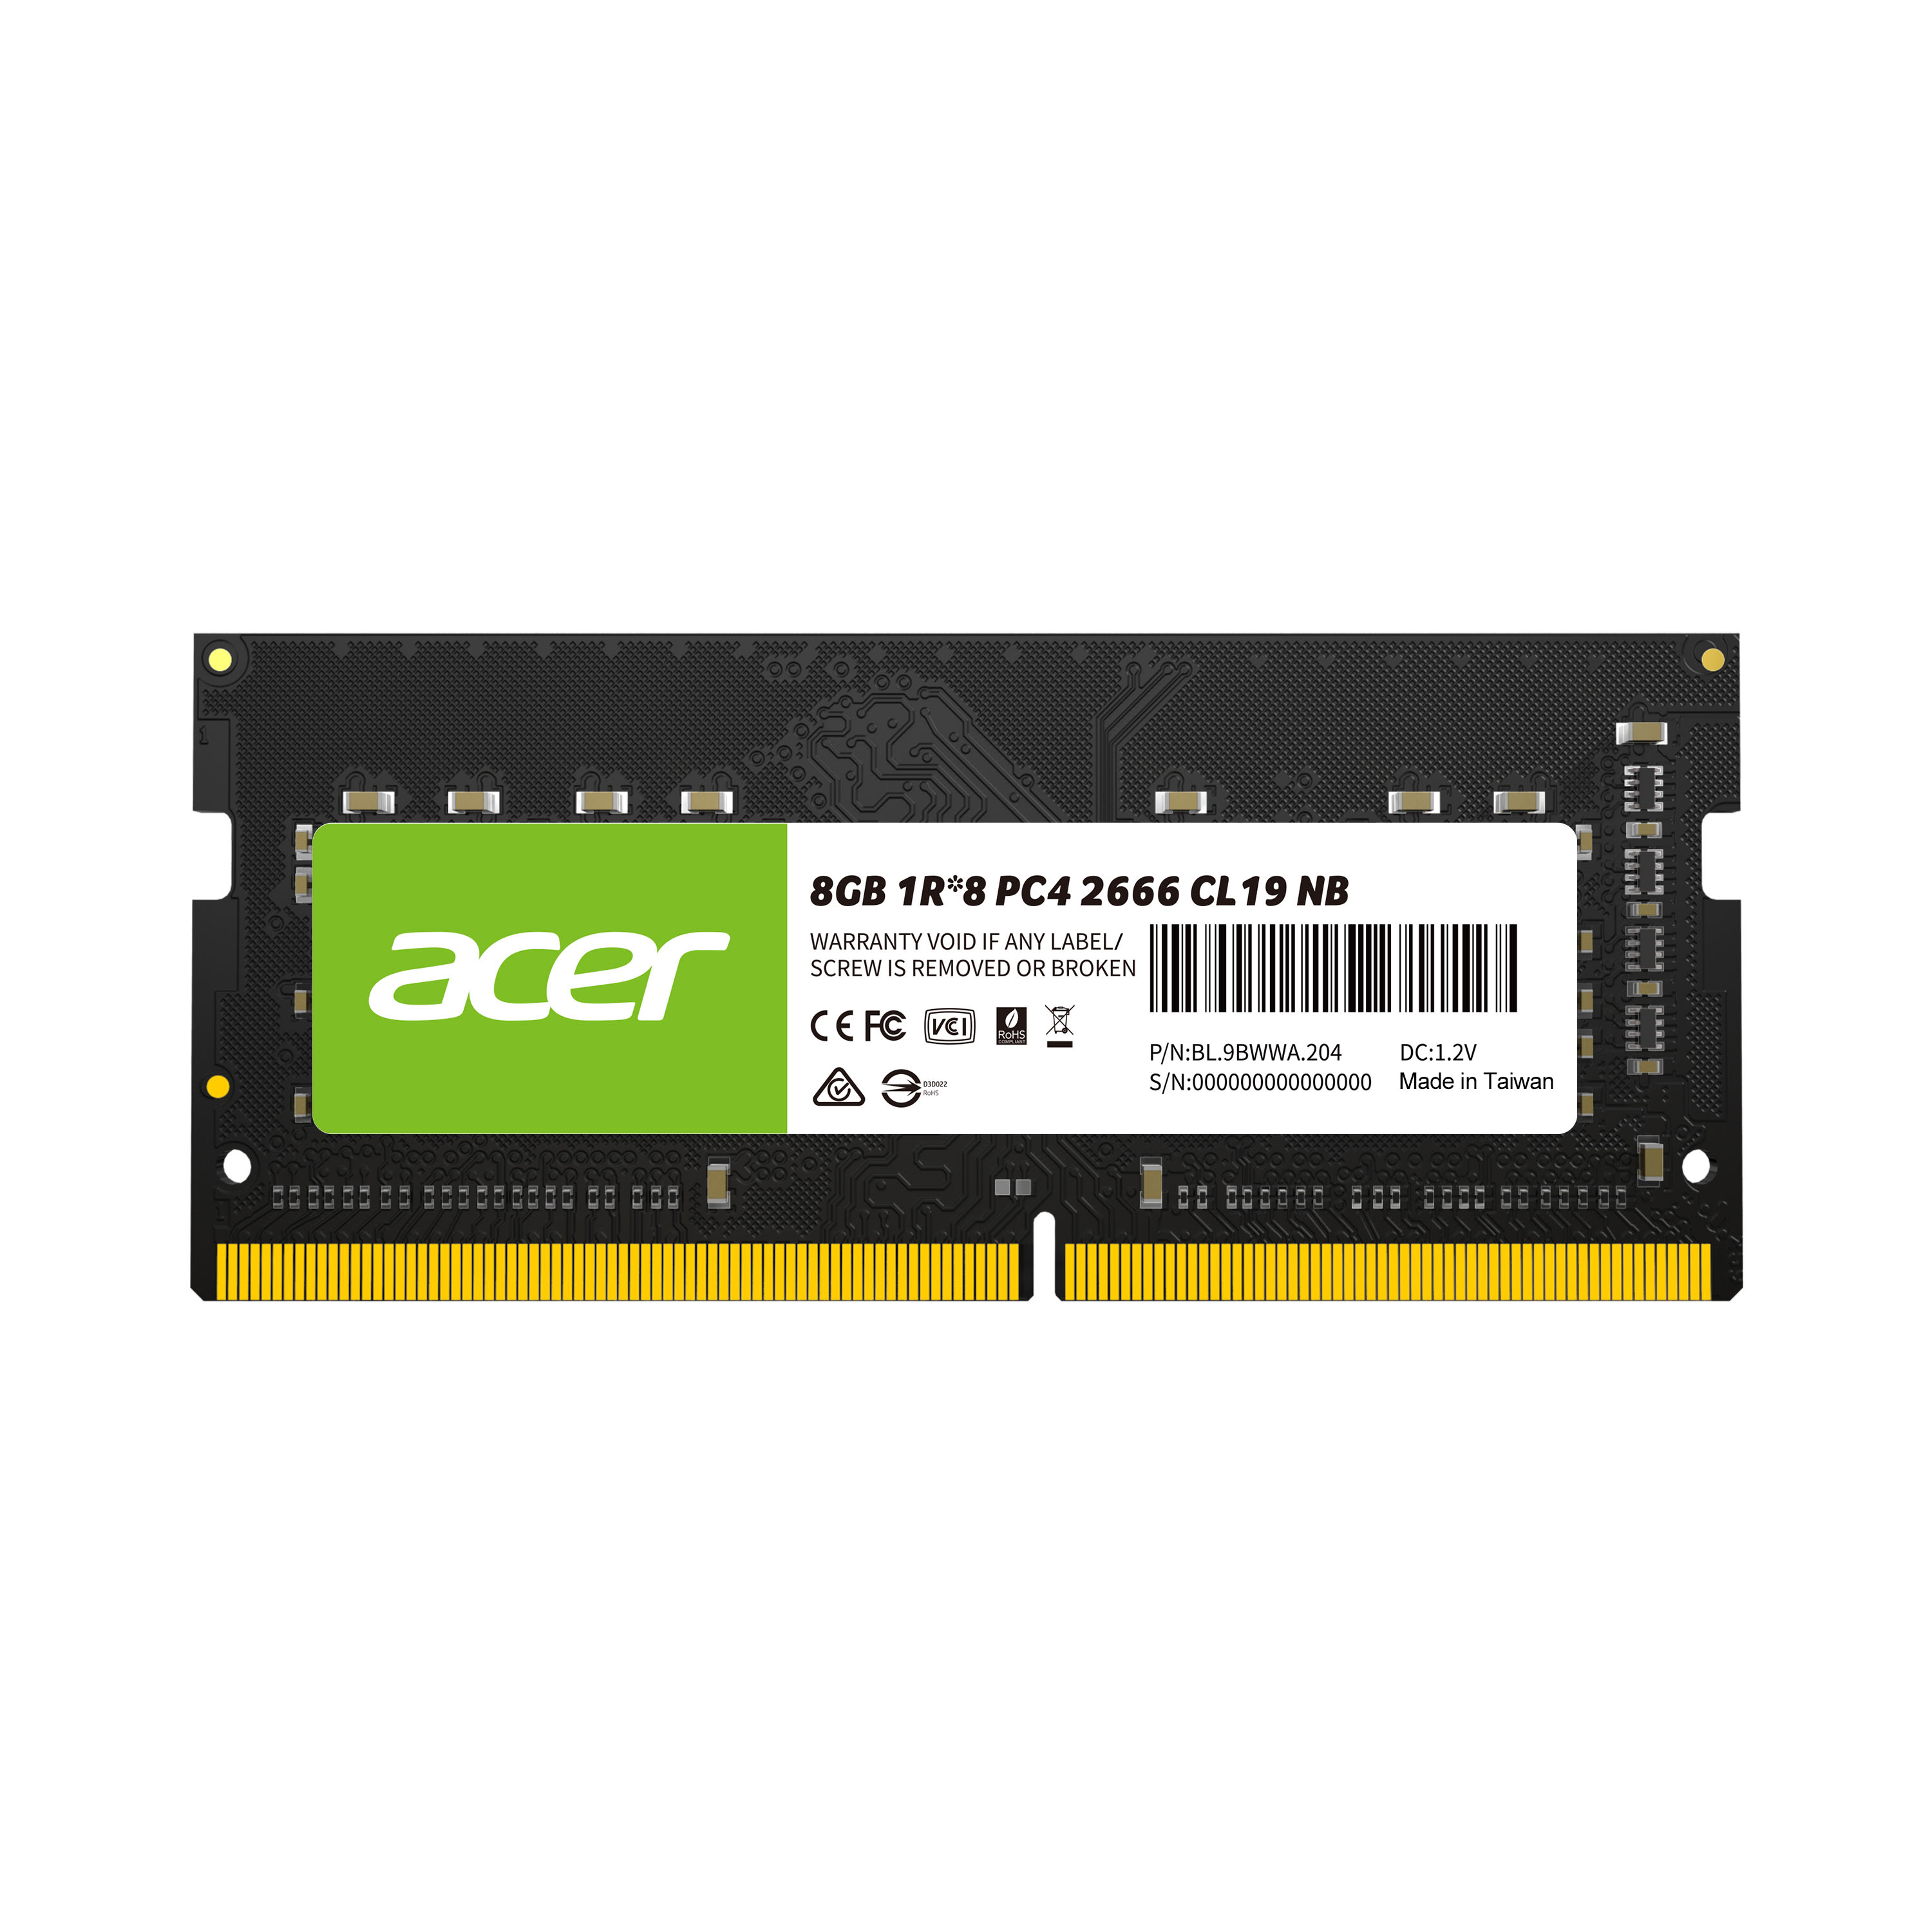 With Acer SD100, operating systems and apps open quickly